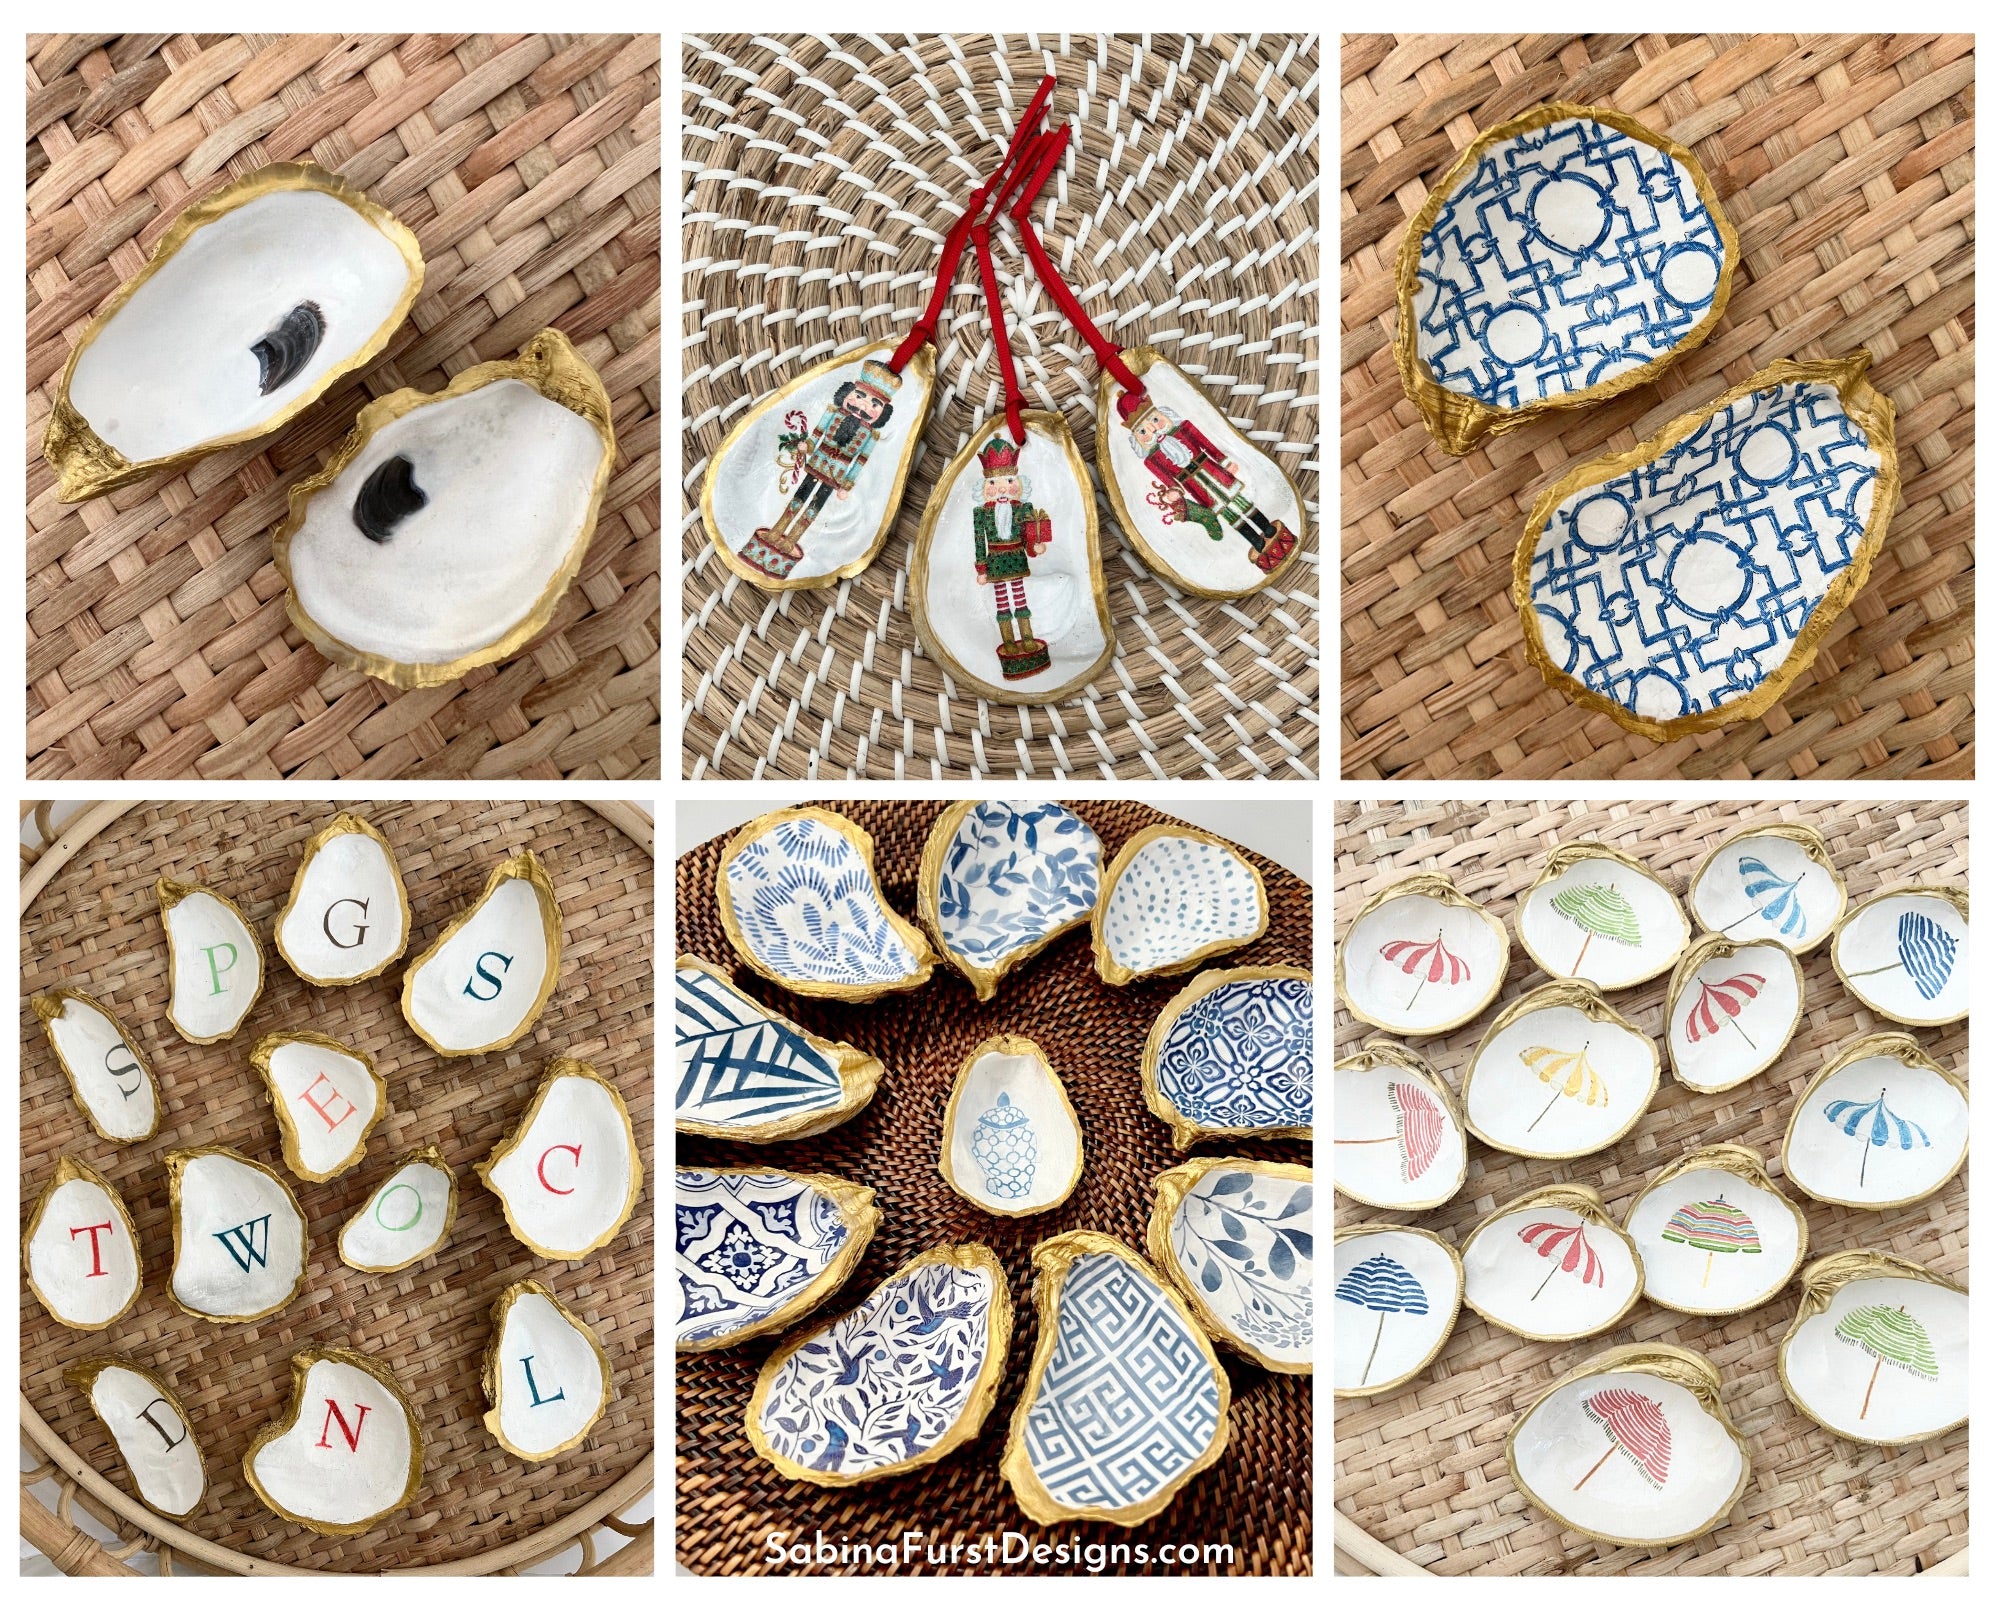 oyster ring dishes and ornaments